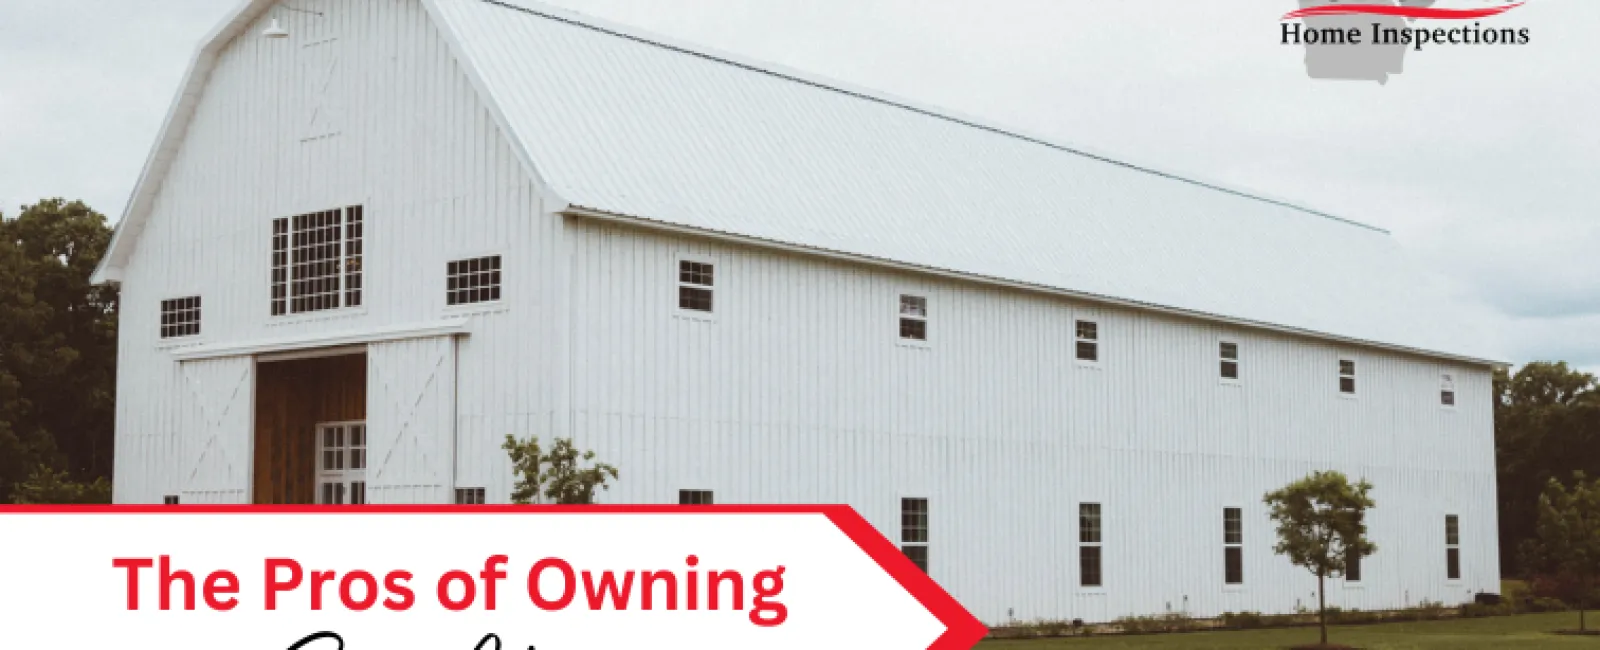 The Pros of Owning a Barn Home